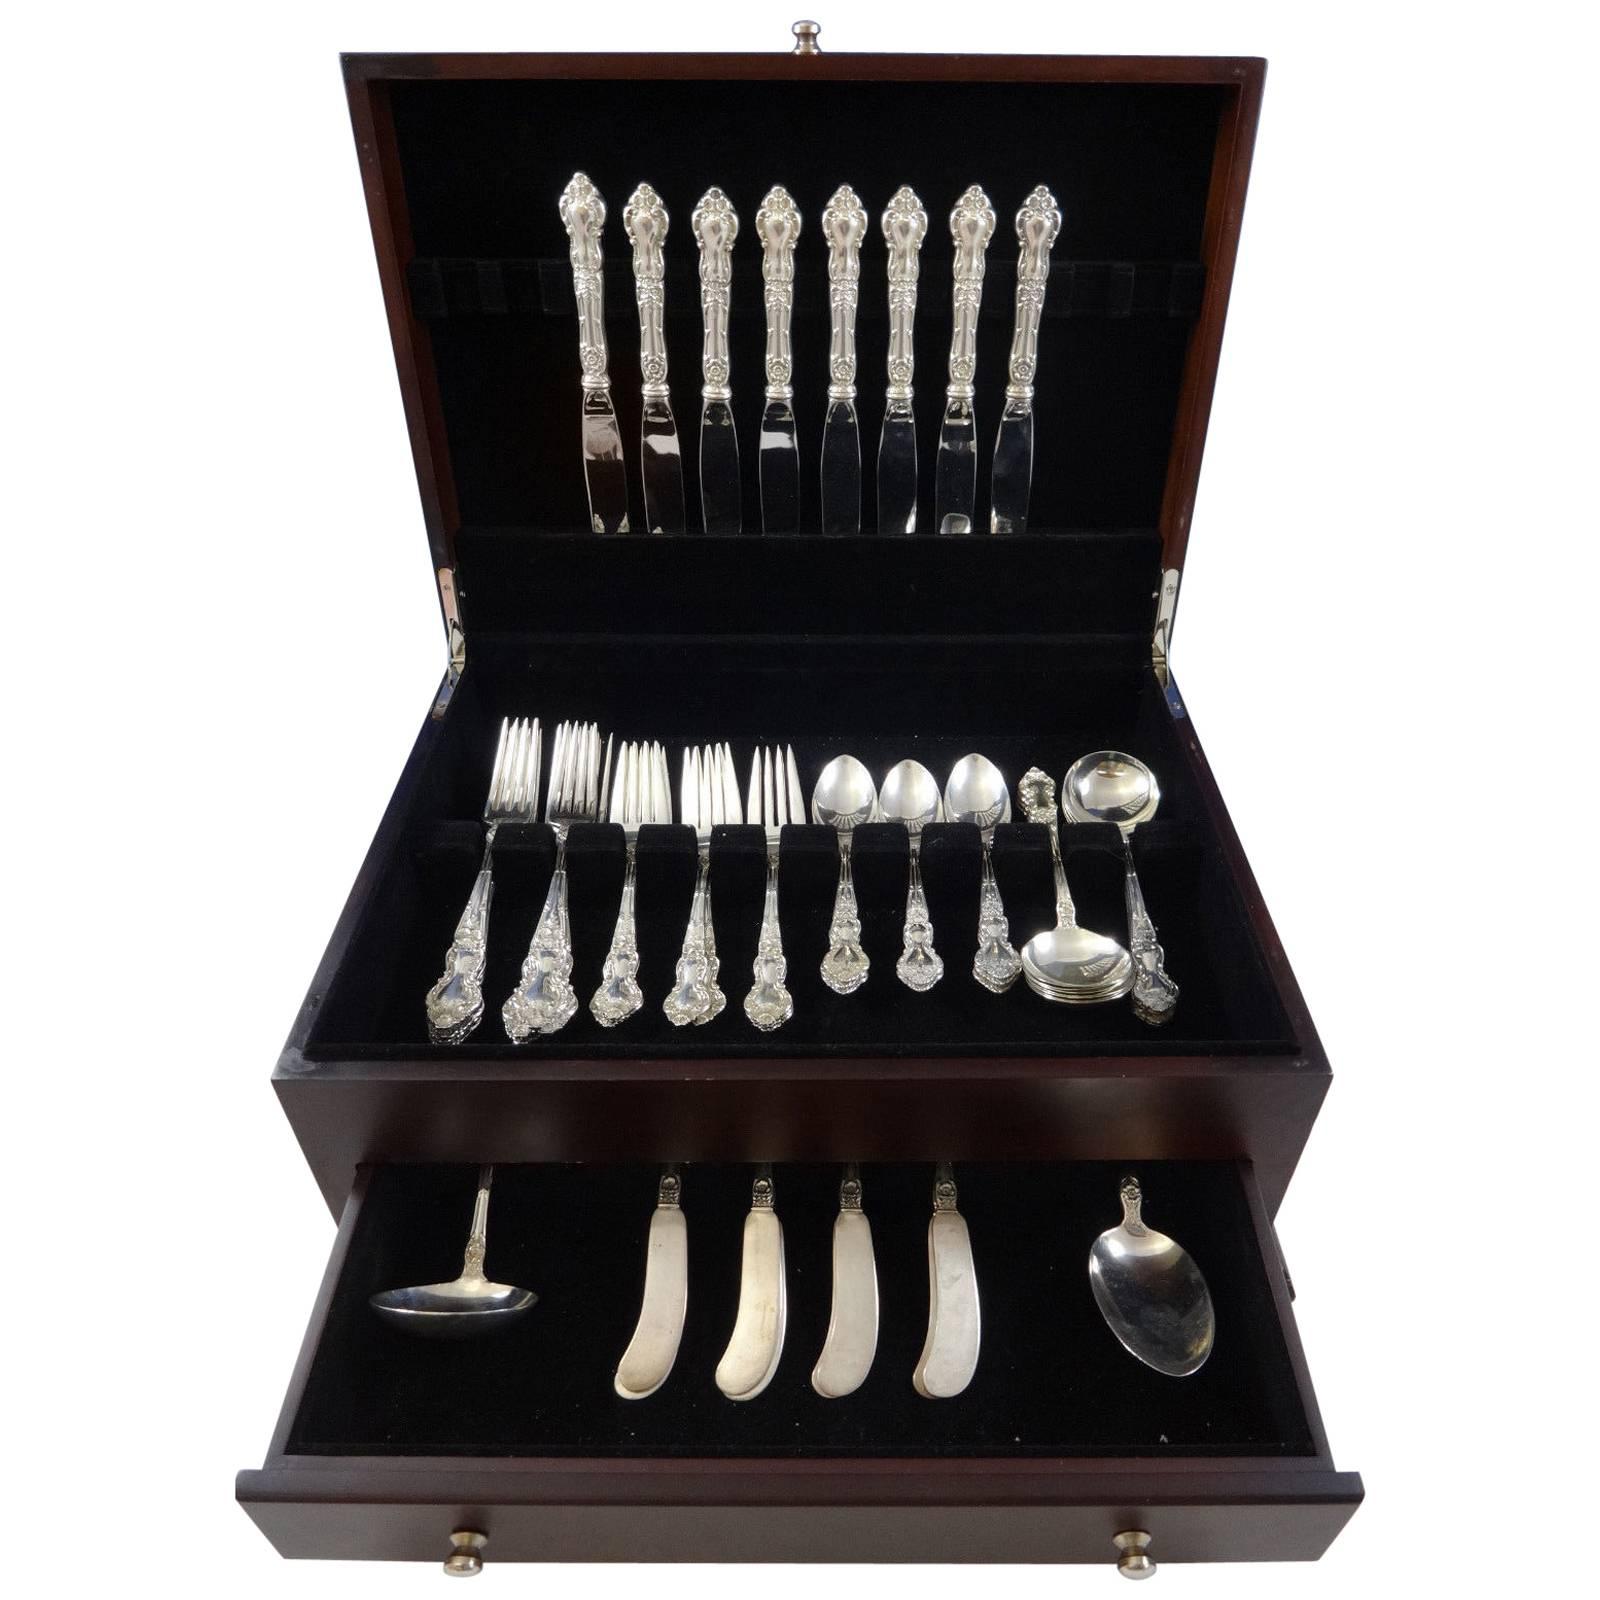 Beautiful meadow rose by Wallace sterling silver flatware set of 50 pieces. This set includes:

Eight knives, modern blade, 8 3/4